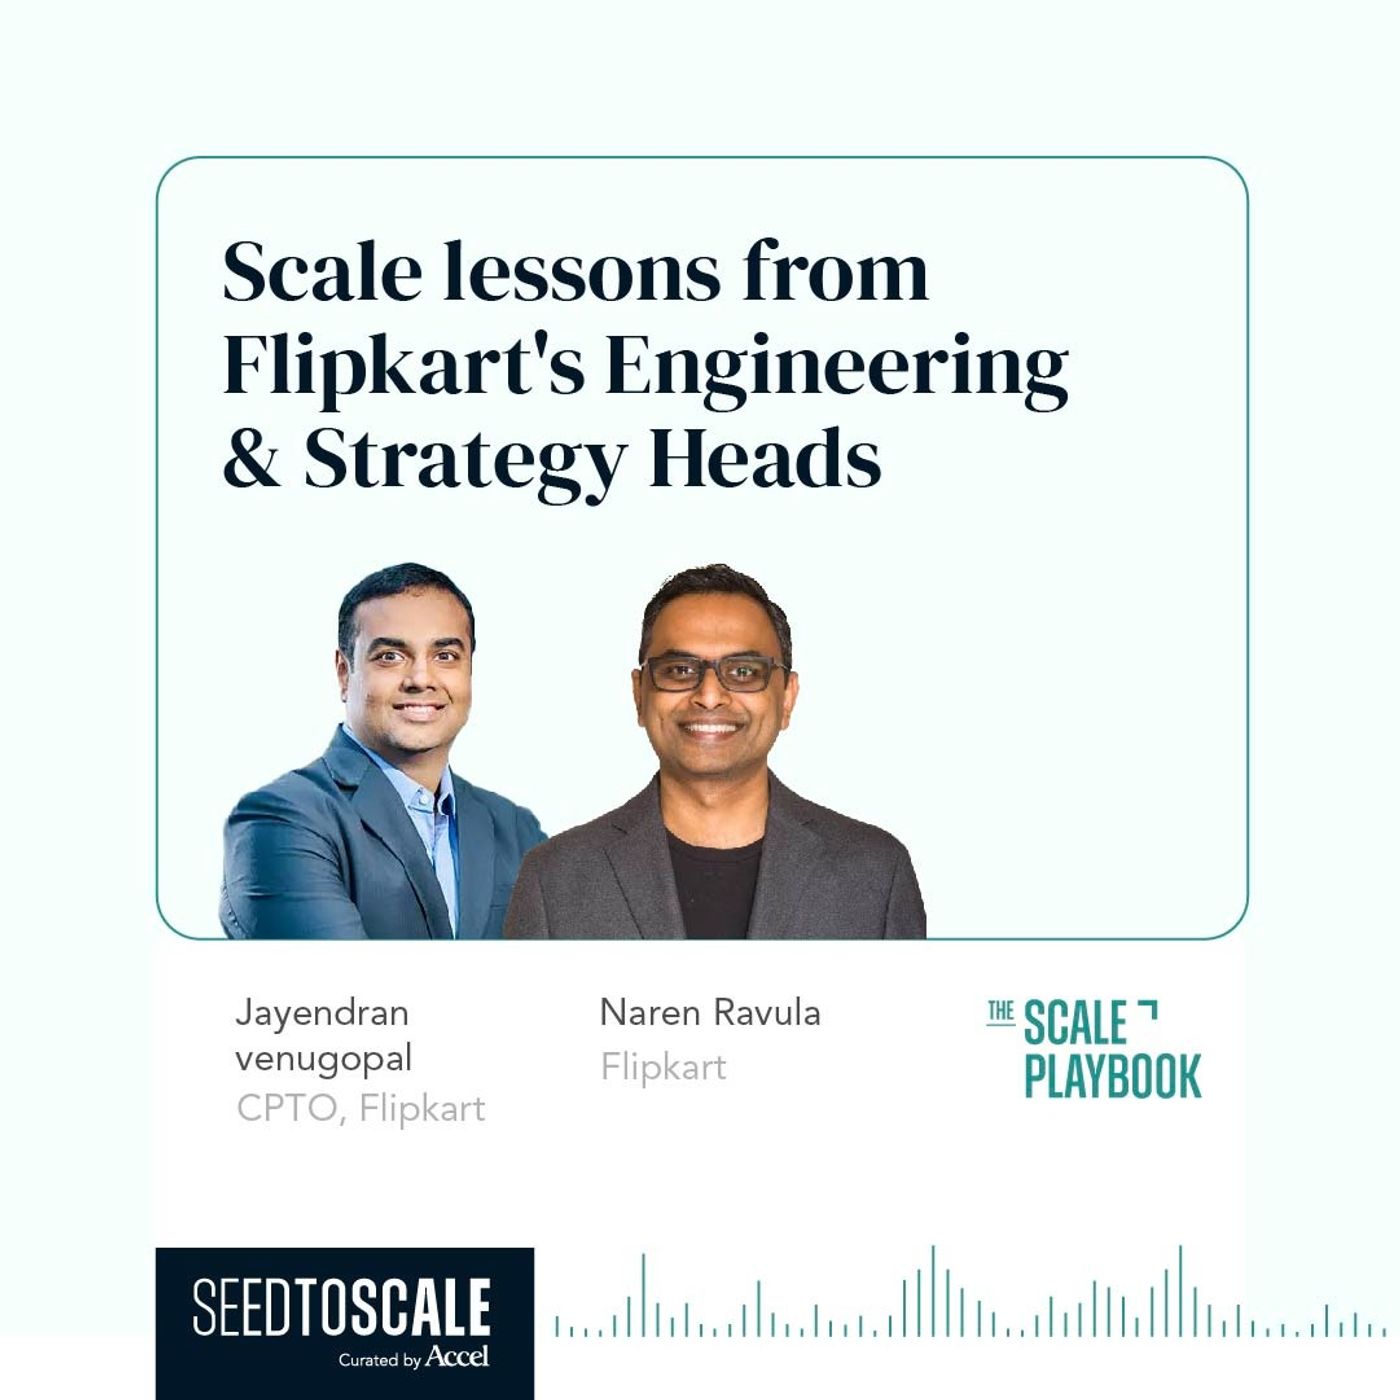 INSIGHTS #58 – The Scale Playbook: Scale lessons from Flipkart’s Engineering & Strategy Heads